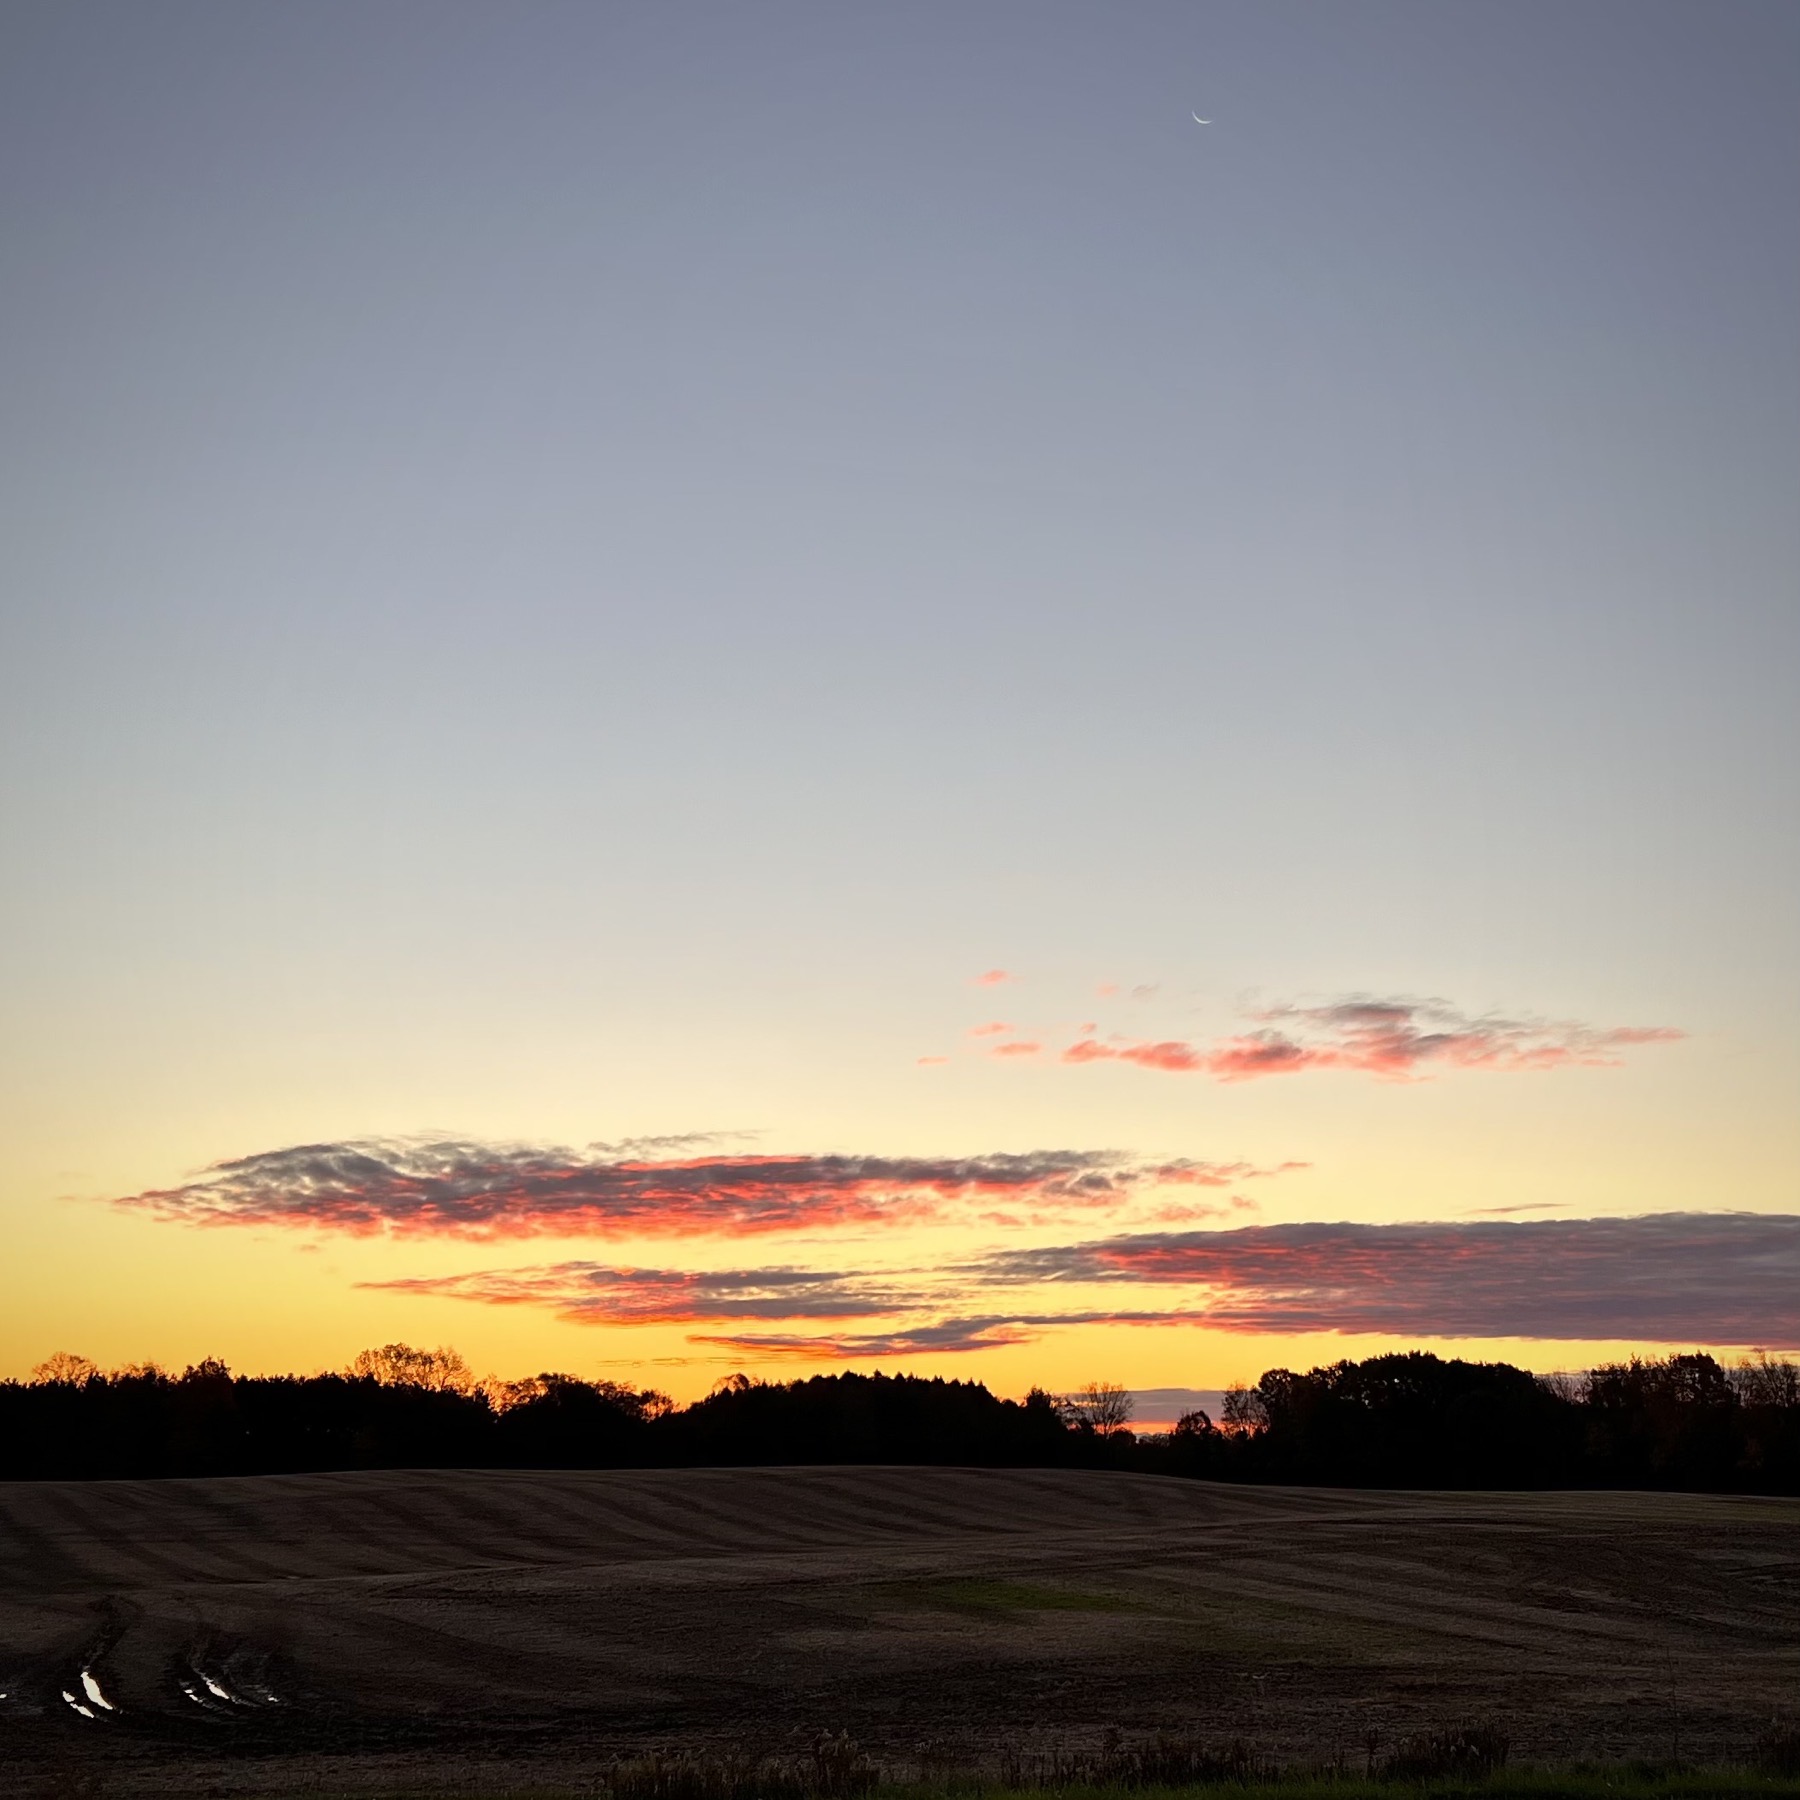 Sunrise over field with moon above.